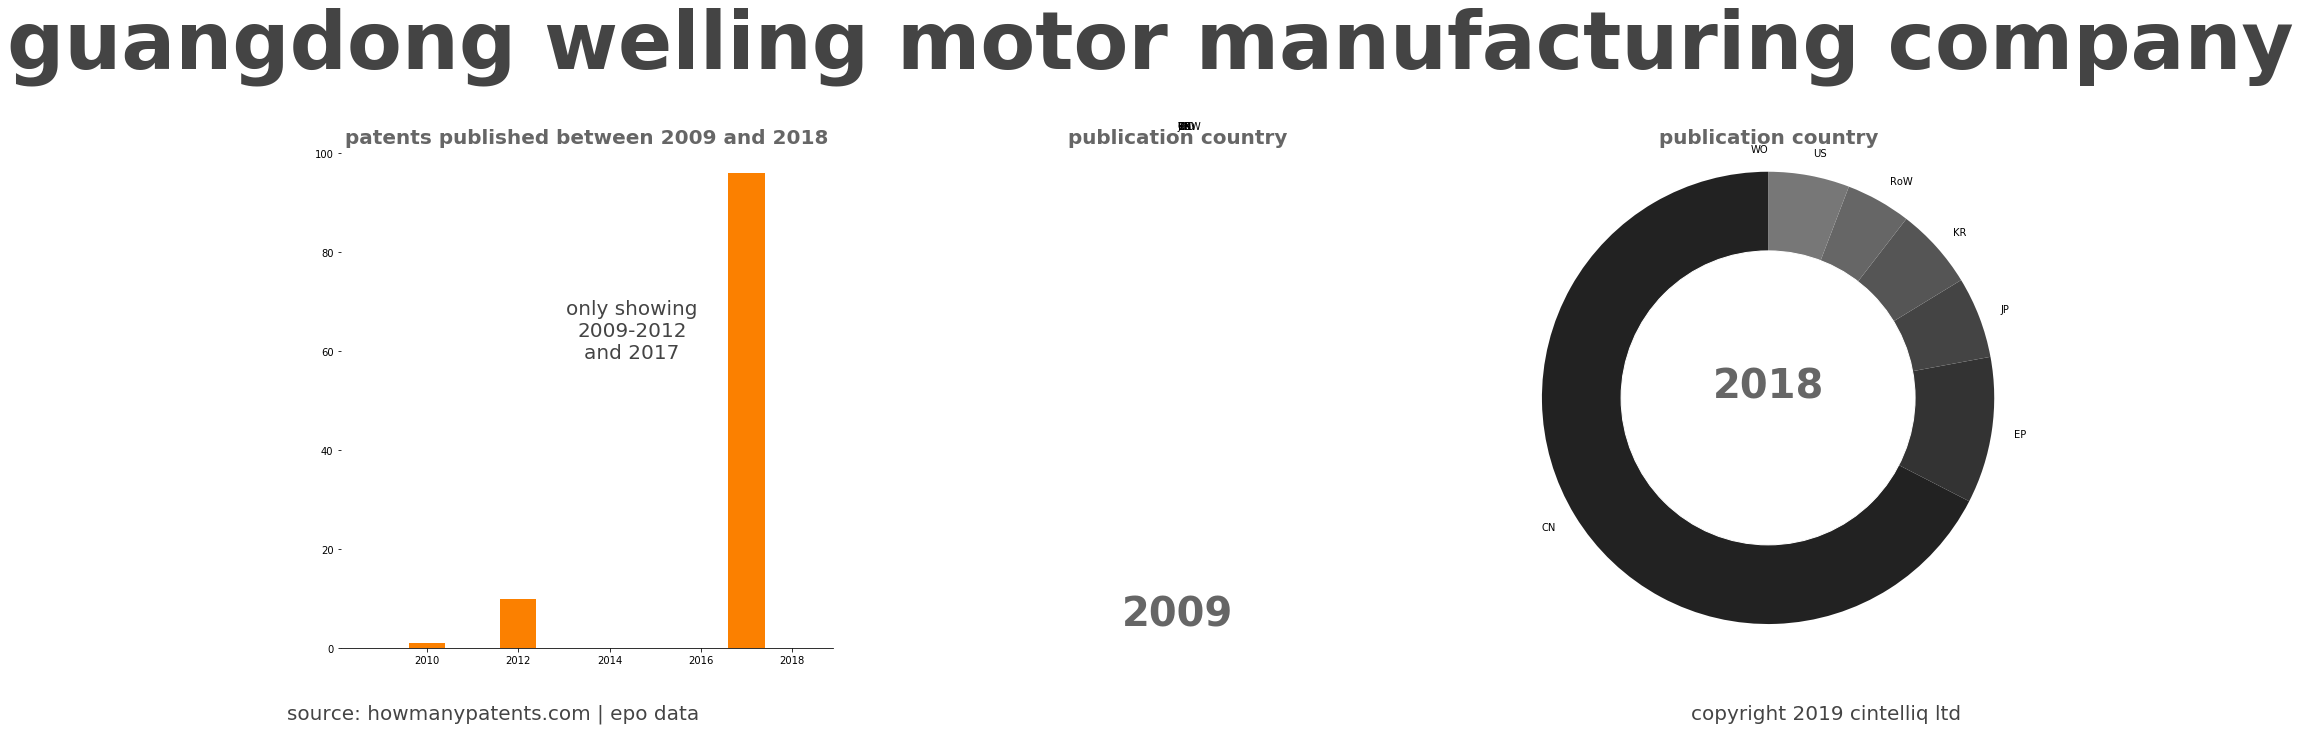 summary of patents for Guangdong Welling Motor Manufacturing Company